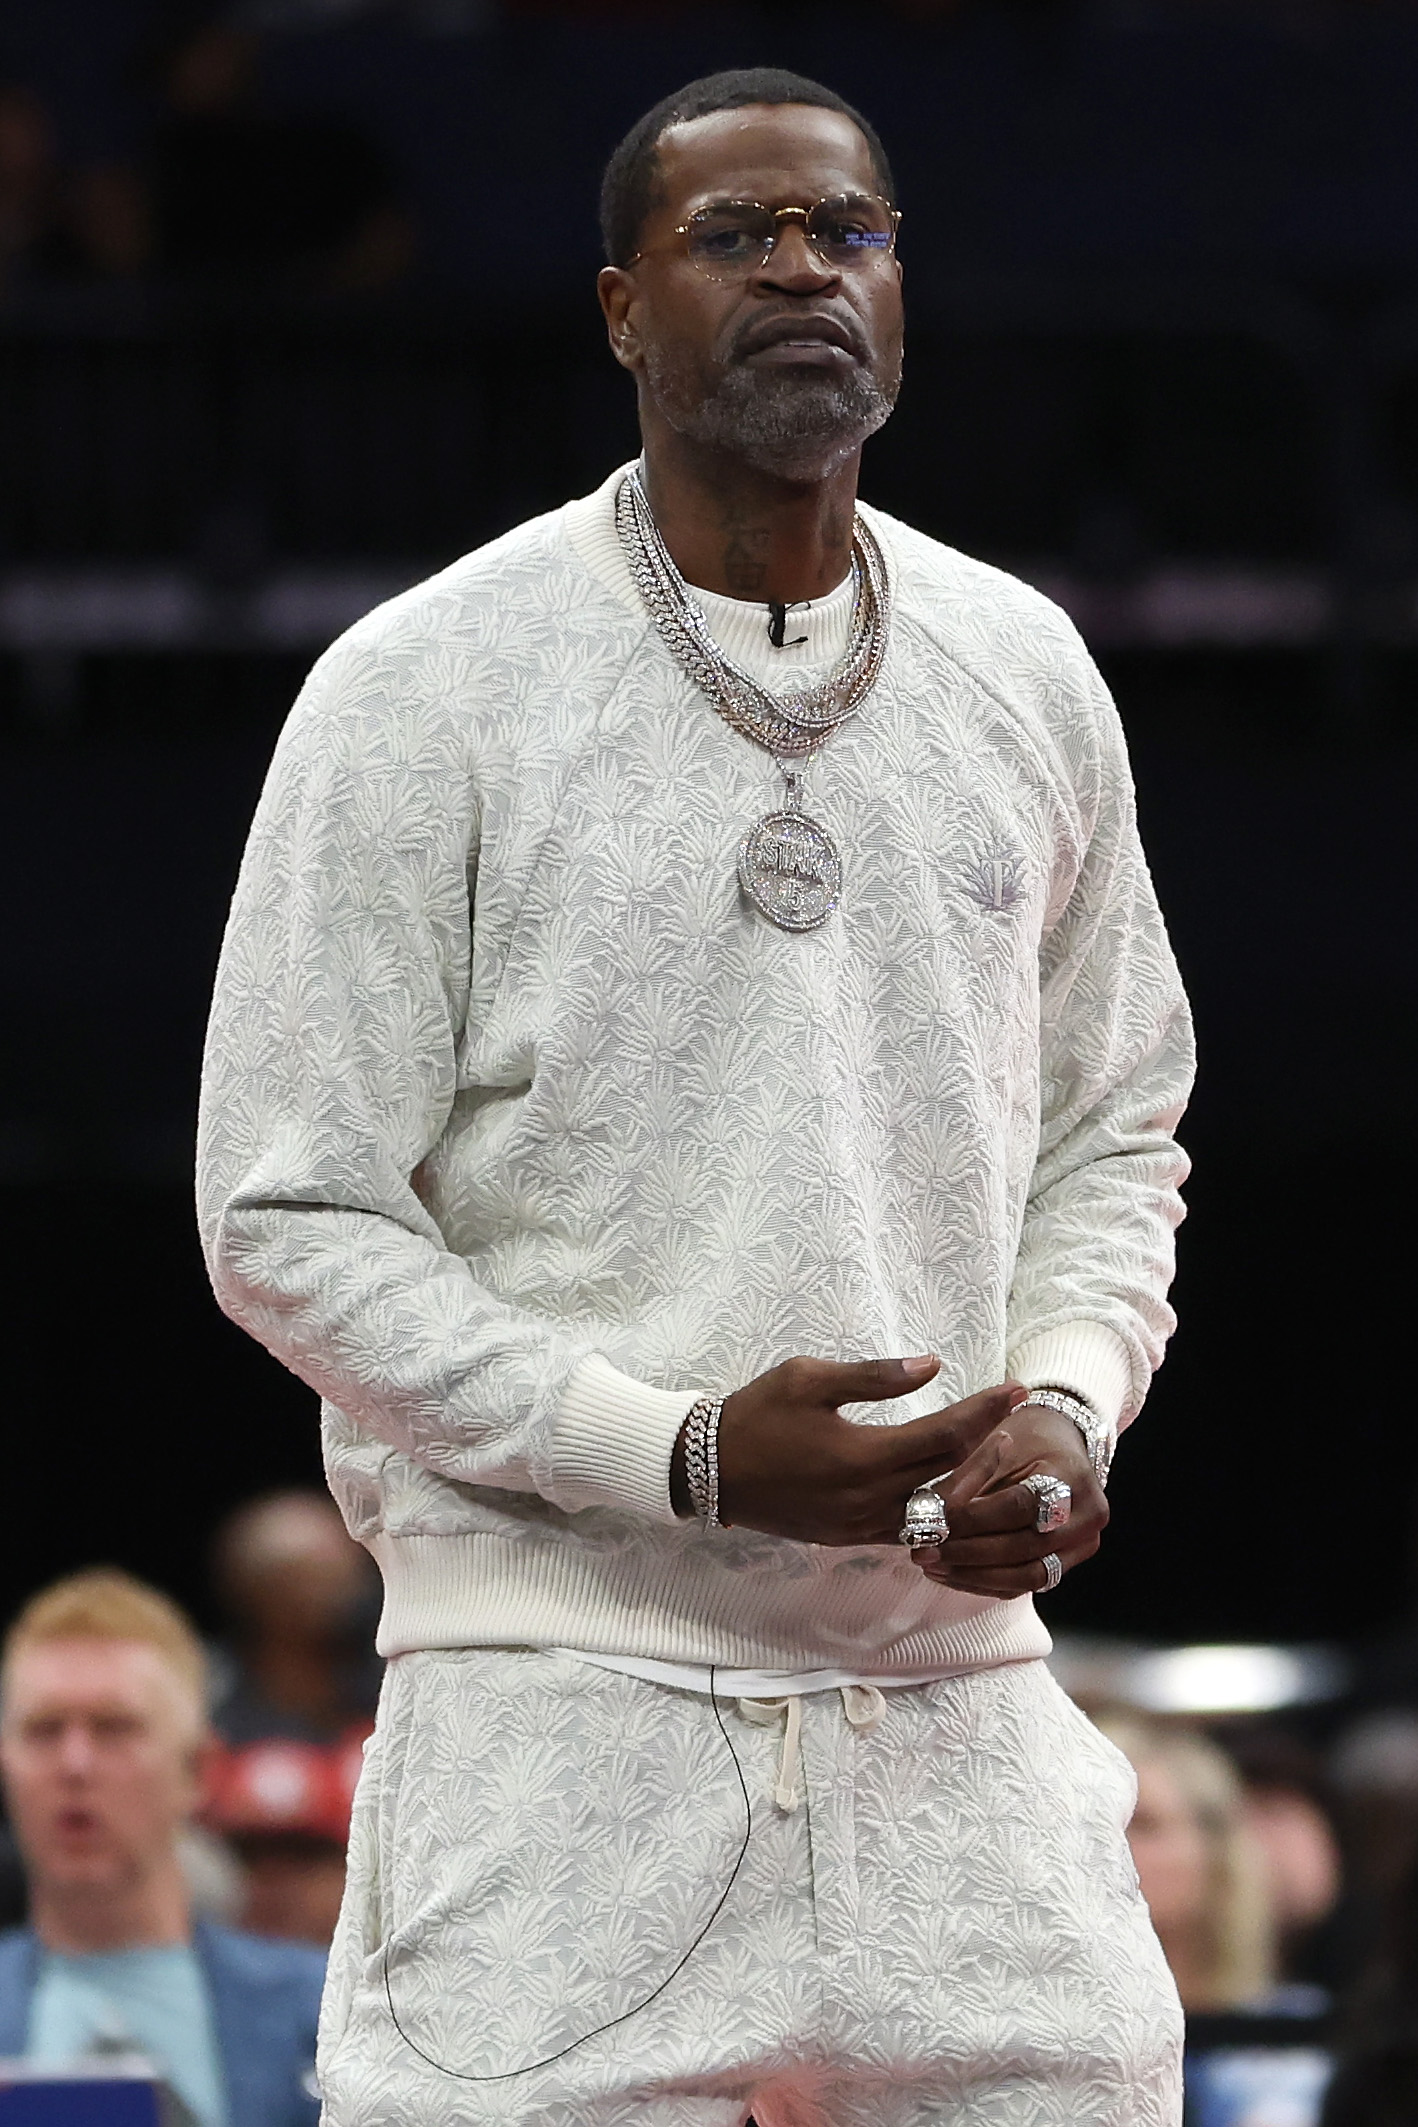 Stephen Jackson of the Trilogy looks on during the BIG3 Playoffs on August 14, 2022, at Amalie Arena in Tampa, Florida. | Source: Getty Images